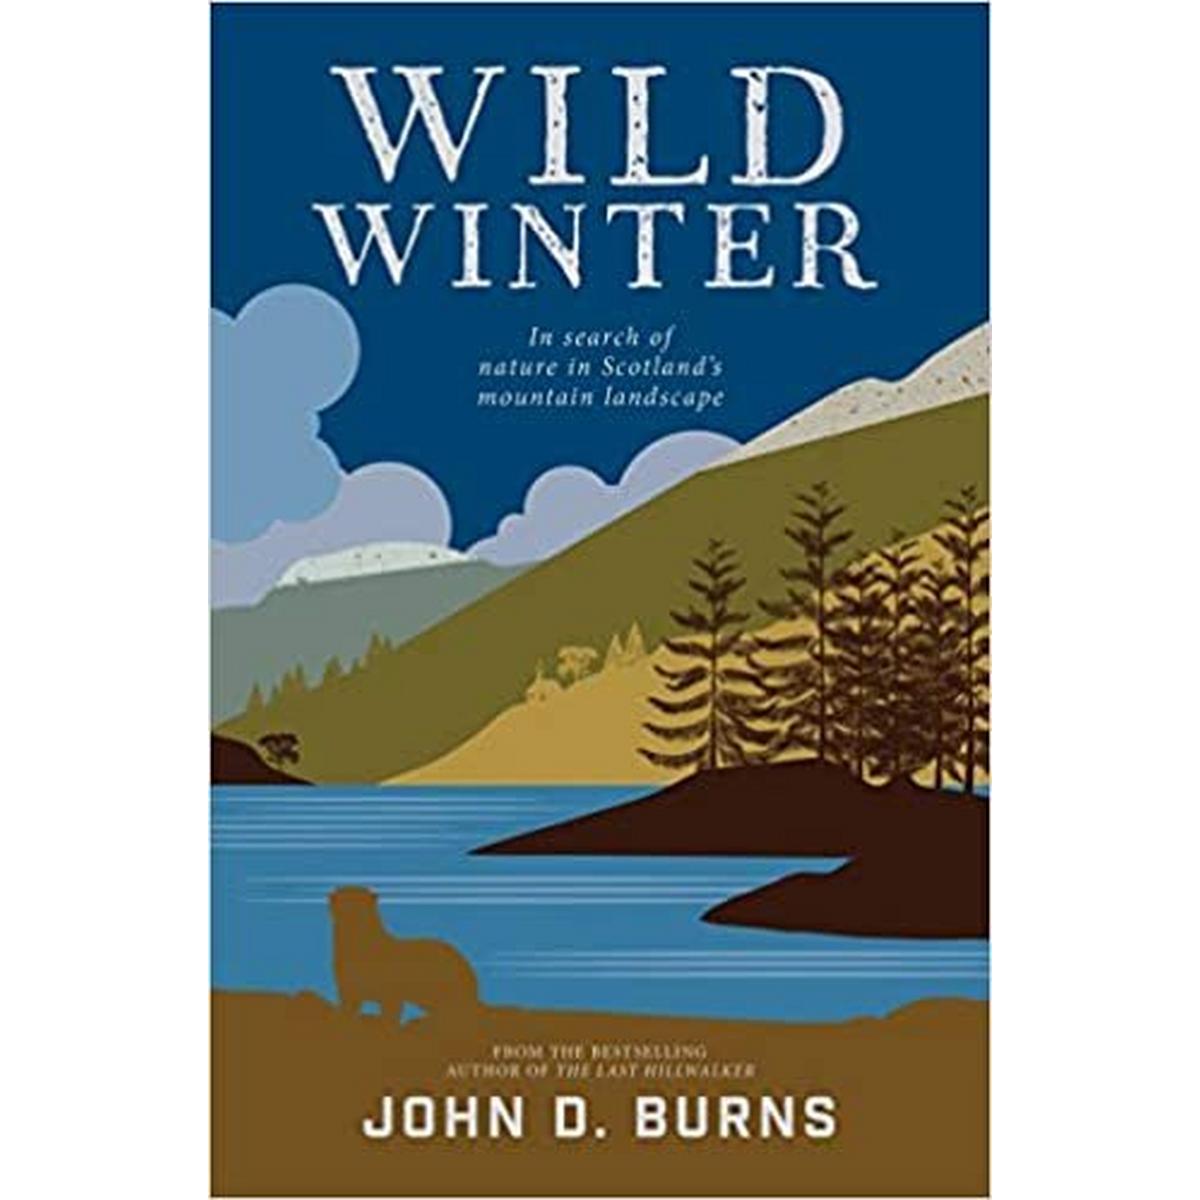 Cordee Wild Winter: In Search of Nature in Scotland's Mountain Landscape by John D.Burns